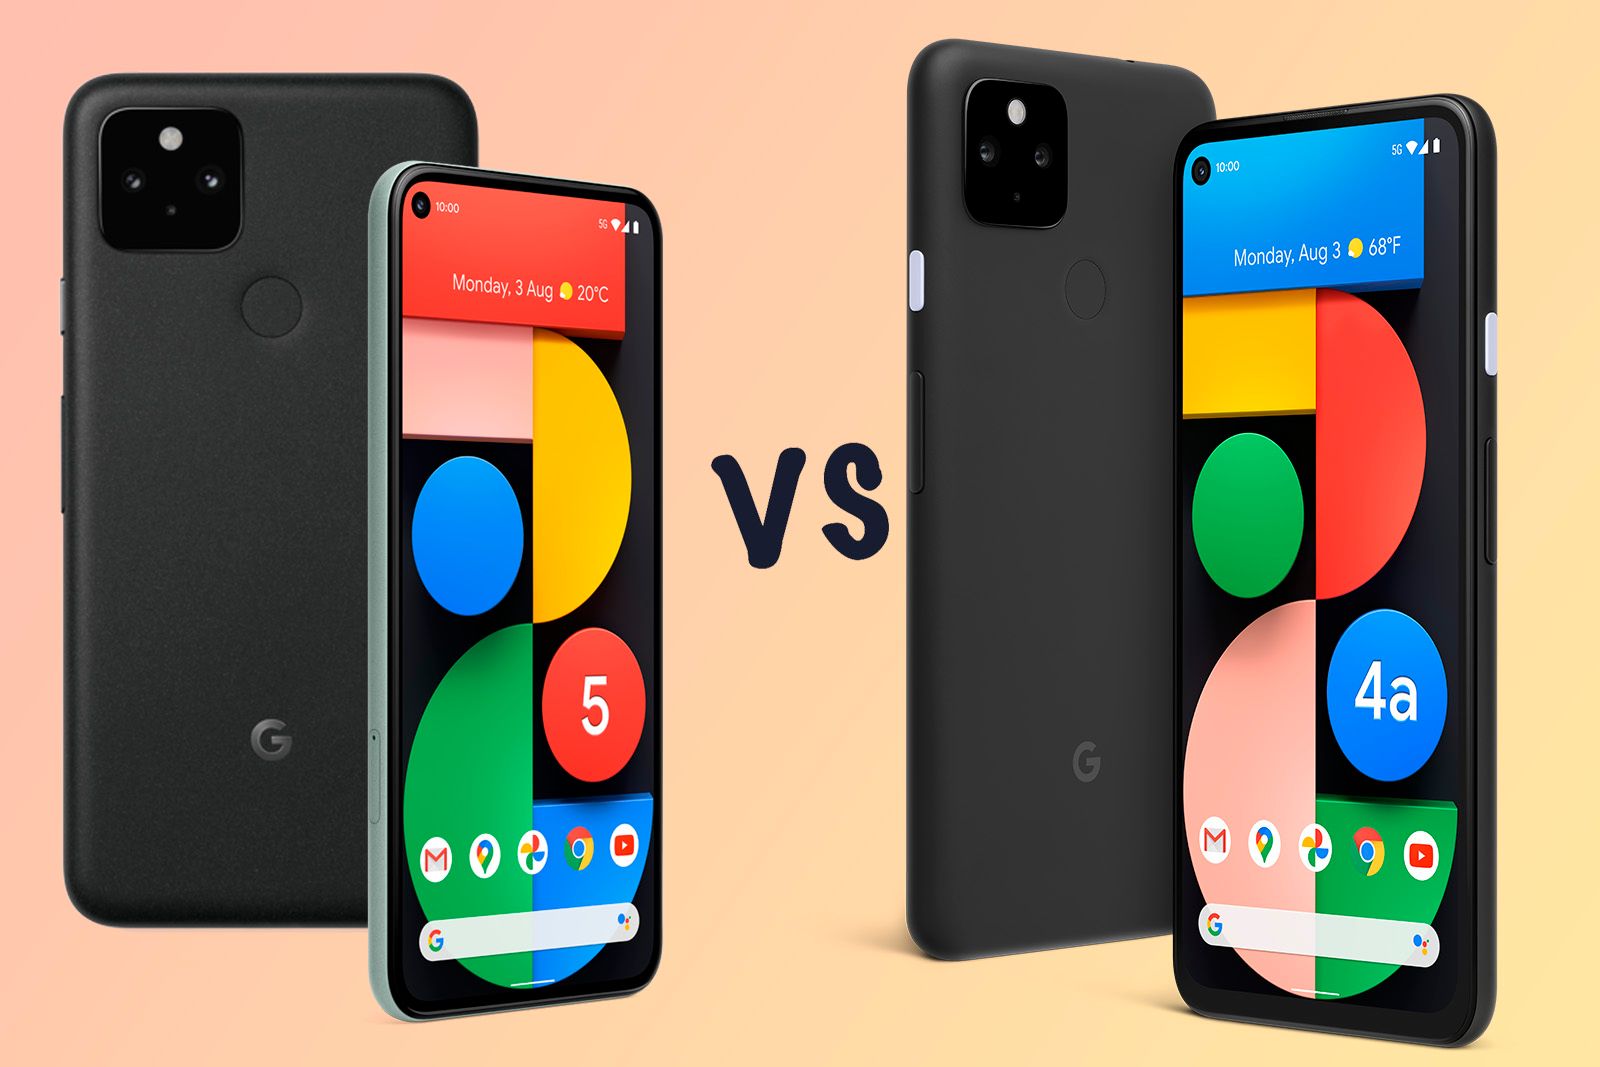 Google Pixel 5 vs Pixel 4a 5G vs Pixel 4a: What's the difference? photo 1